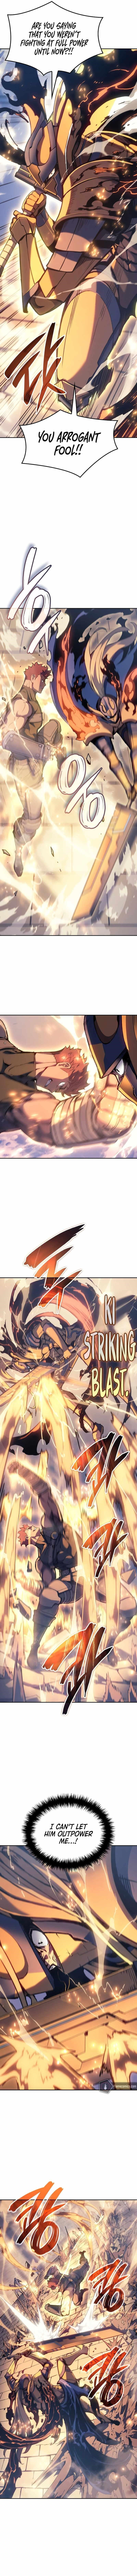 The Indomitable Martial King Chapter 28